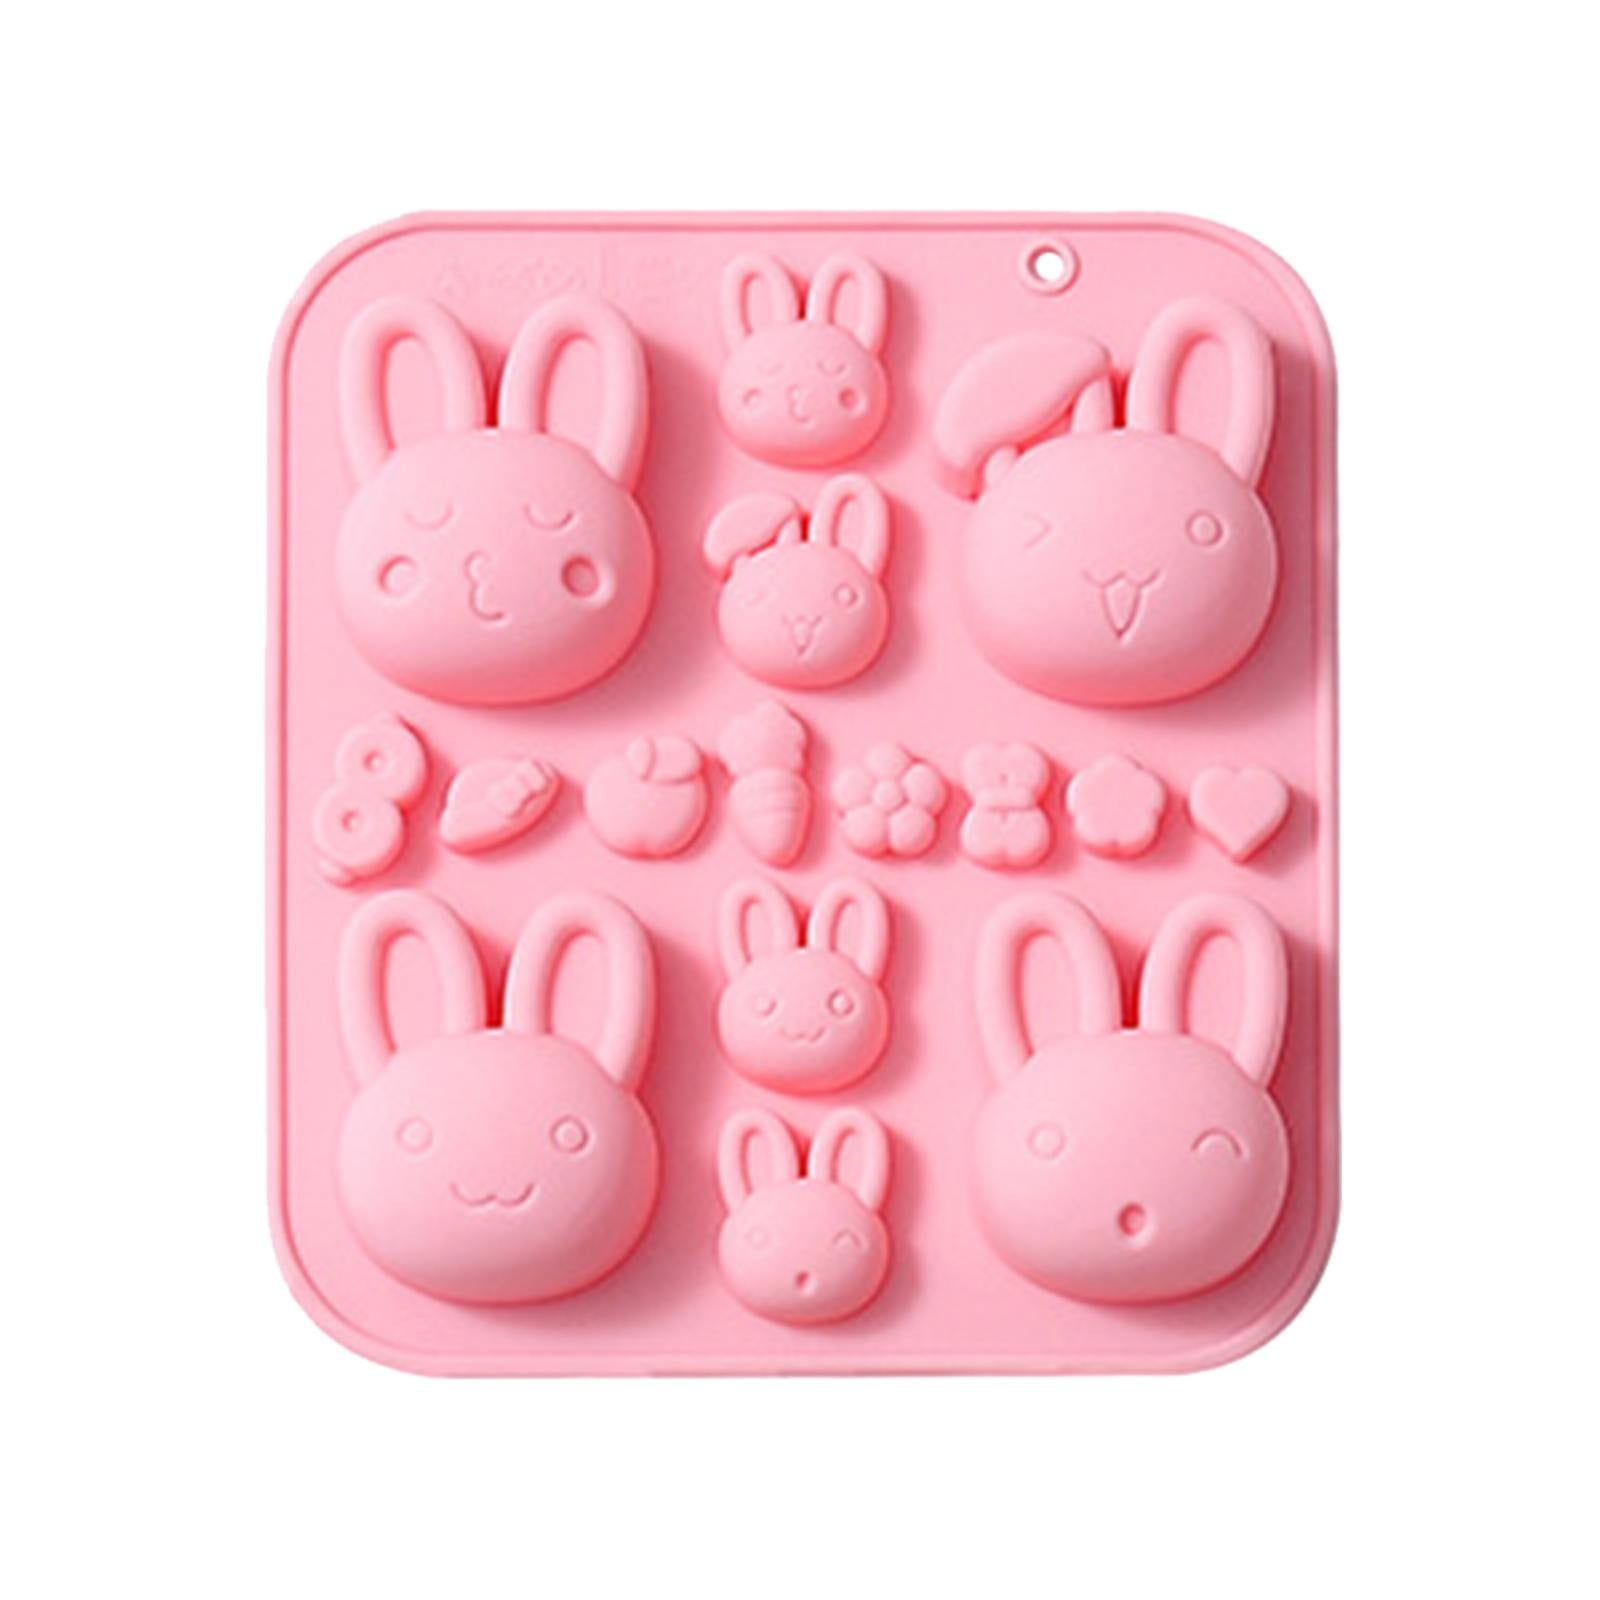 1 Pack House Shape Silicone Mold, 6 Cavity Non-Stick Cozy Village Baking Pan, House Shape Soap Mold, Mini Christmas House Cake Molds for Brownies